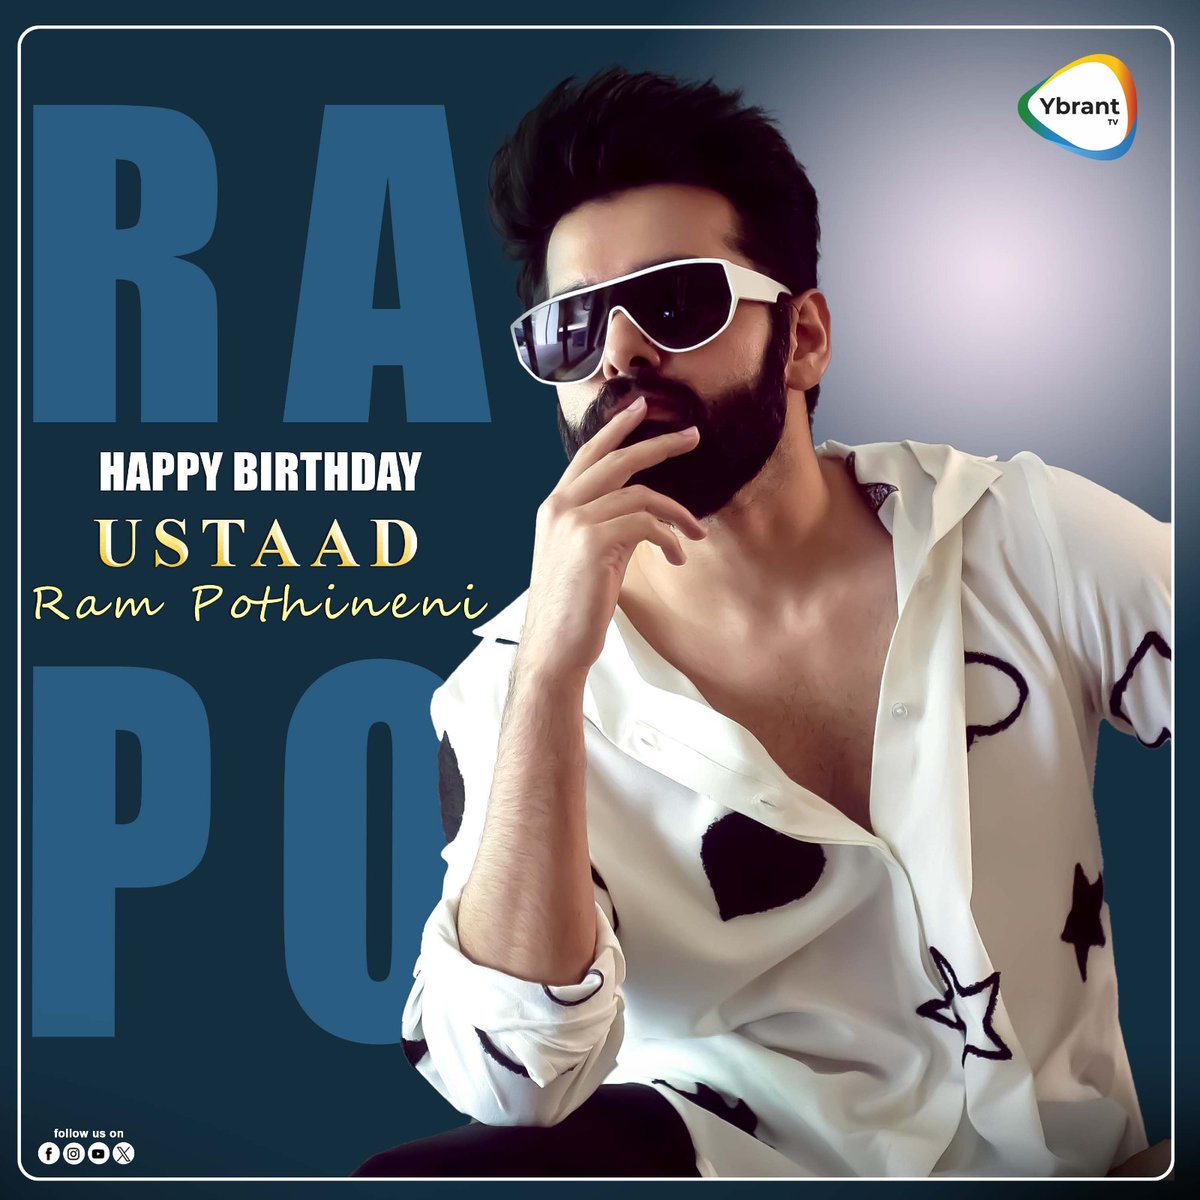 Here's Wishing the energetic star 'Ustaad' @ramsayz a very Happy Birthday!!🎂🎉 We wish you a blockbuster success for your upcoming projects!!🥳🤩

#HappyBirthdayRamPothineni #HBDRamPothineni #HBDRapo #DoubleISMART #YbrantTv